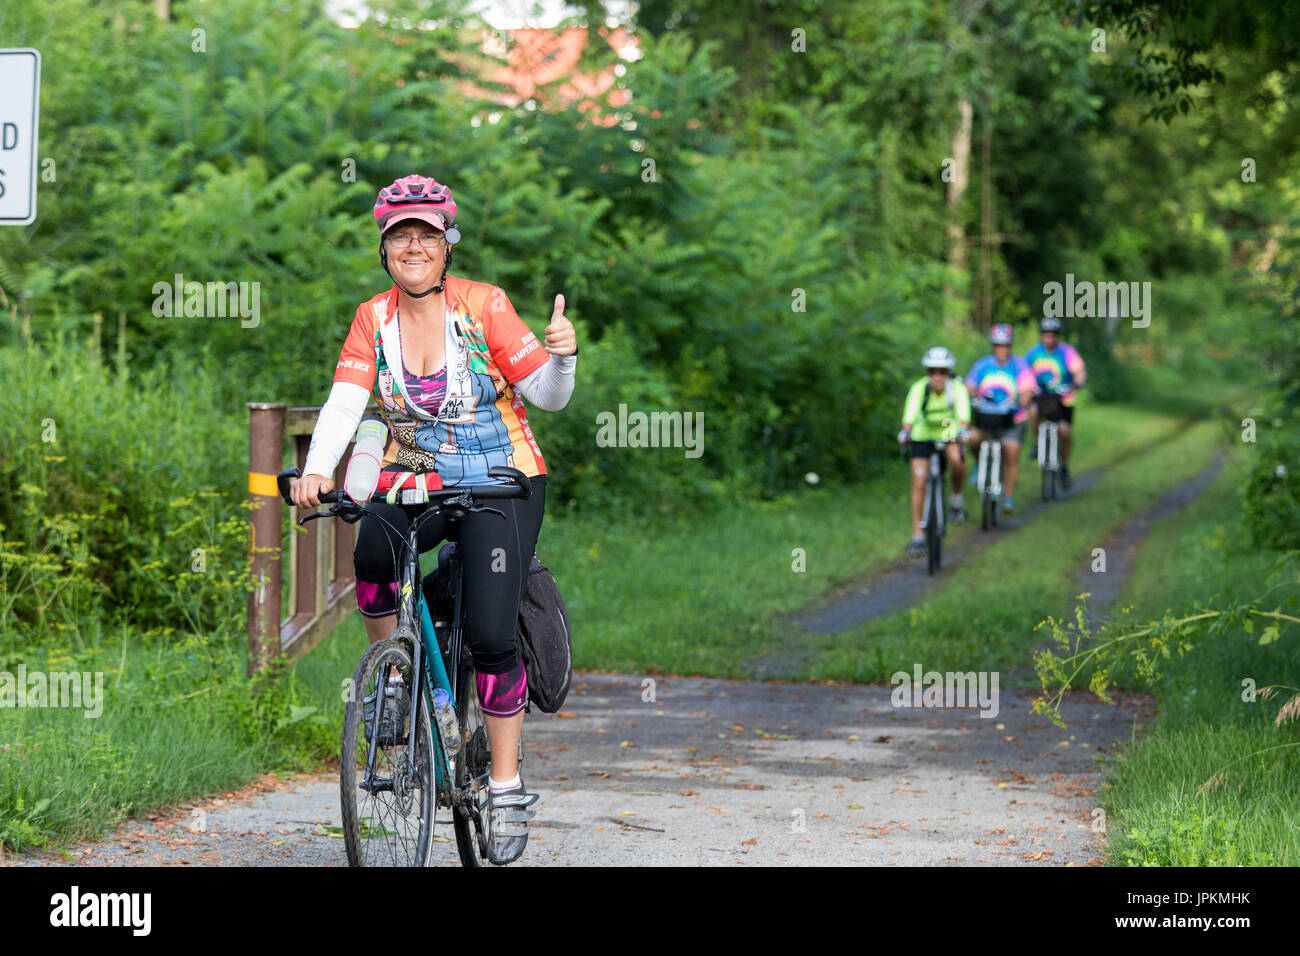 Bicyclists on the Erie Canalway Trail, near Canajoharie, New York State, during the annual Cycle the Erie Canal bike tour event. Stock Photo